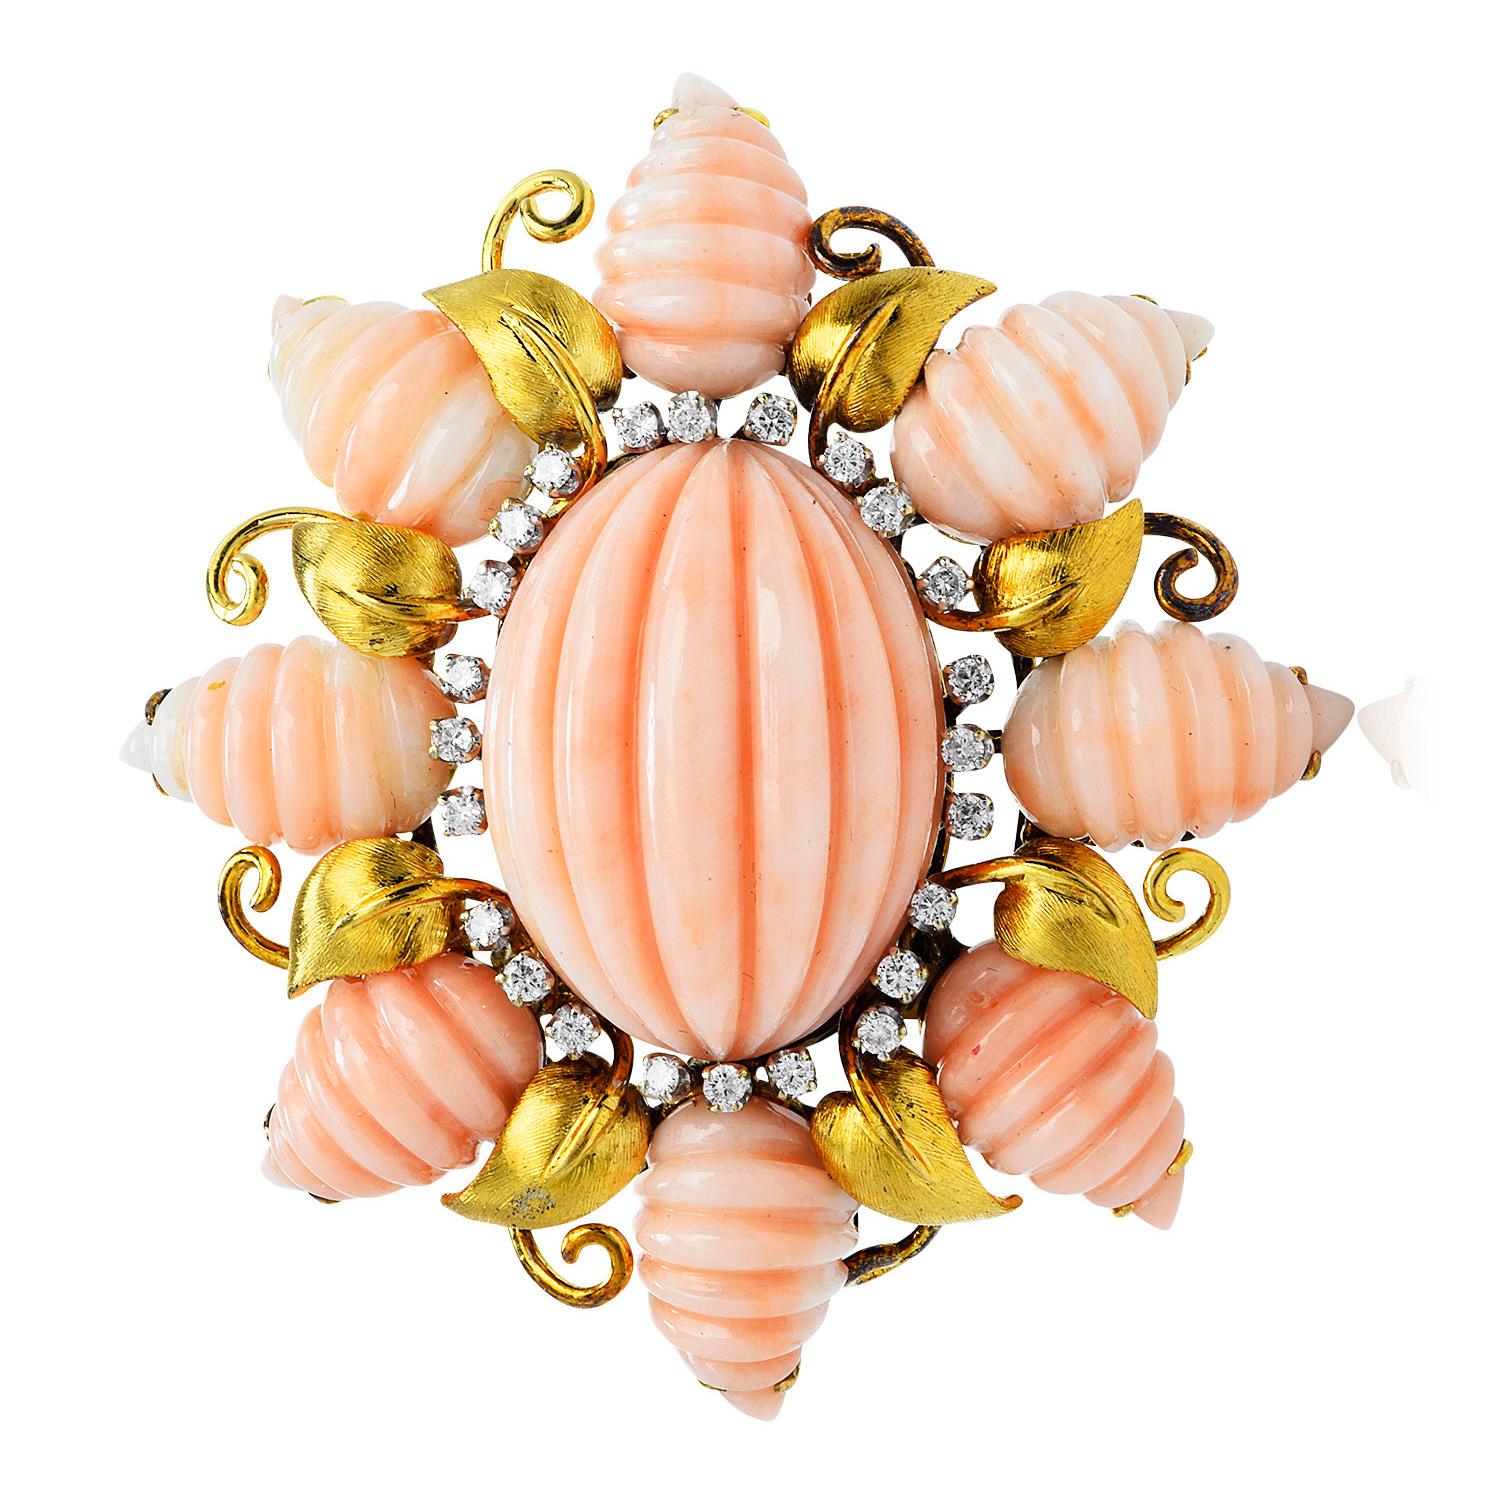 With an exquisite textured design by TRIO, these enchanting vintage pink Carved coral & diamond piece is crafted in solid 18K yellow gold.
Centered by a genuine cabochon oval channeled pink Coral, measuring 27 mm x 22 mm x 14 mm, and adorned with